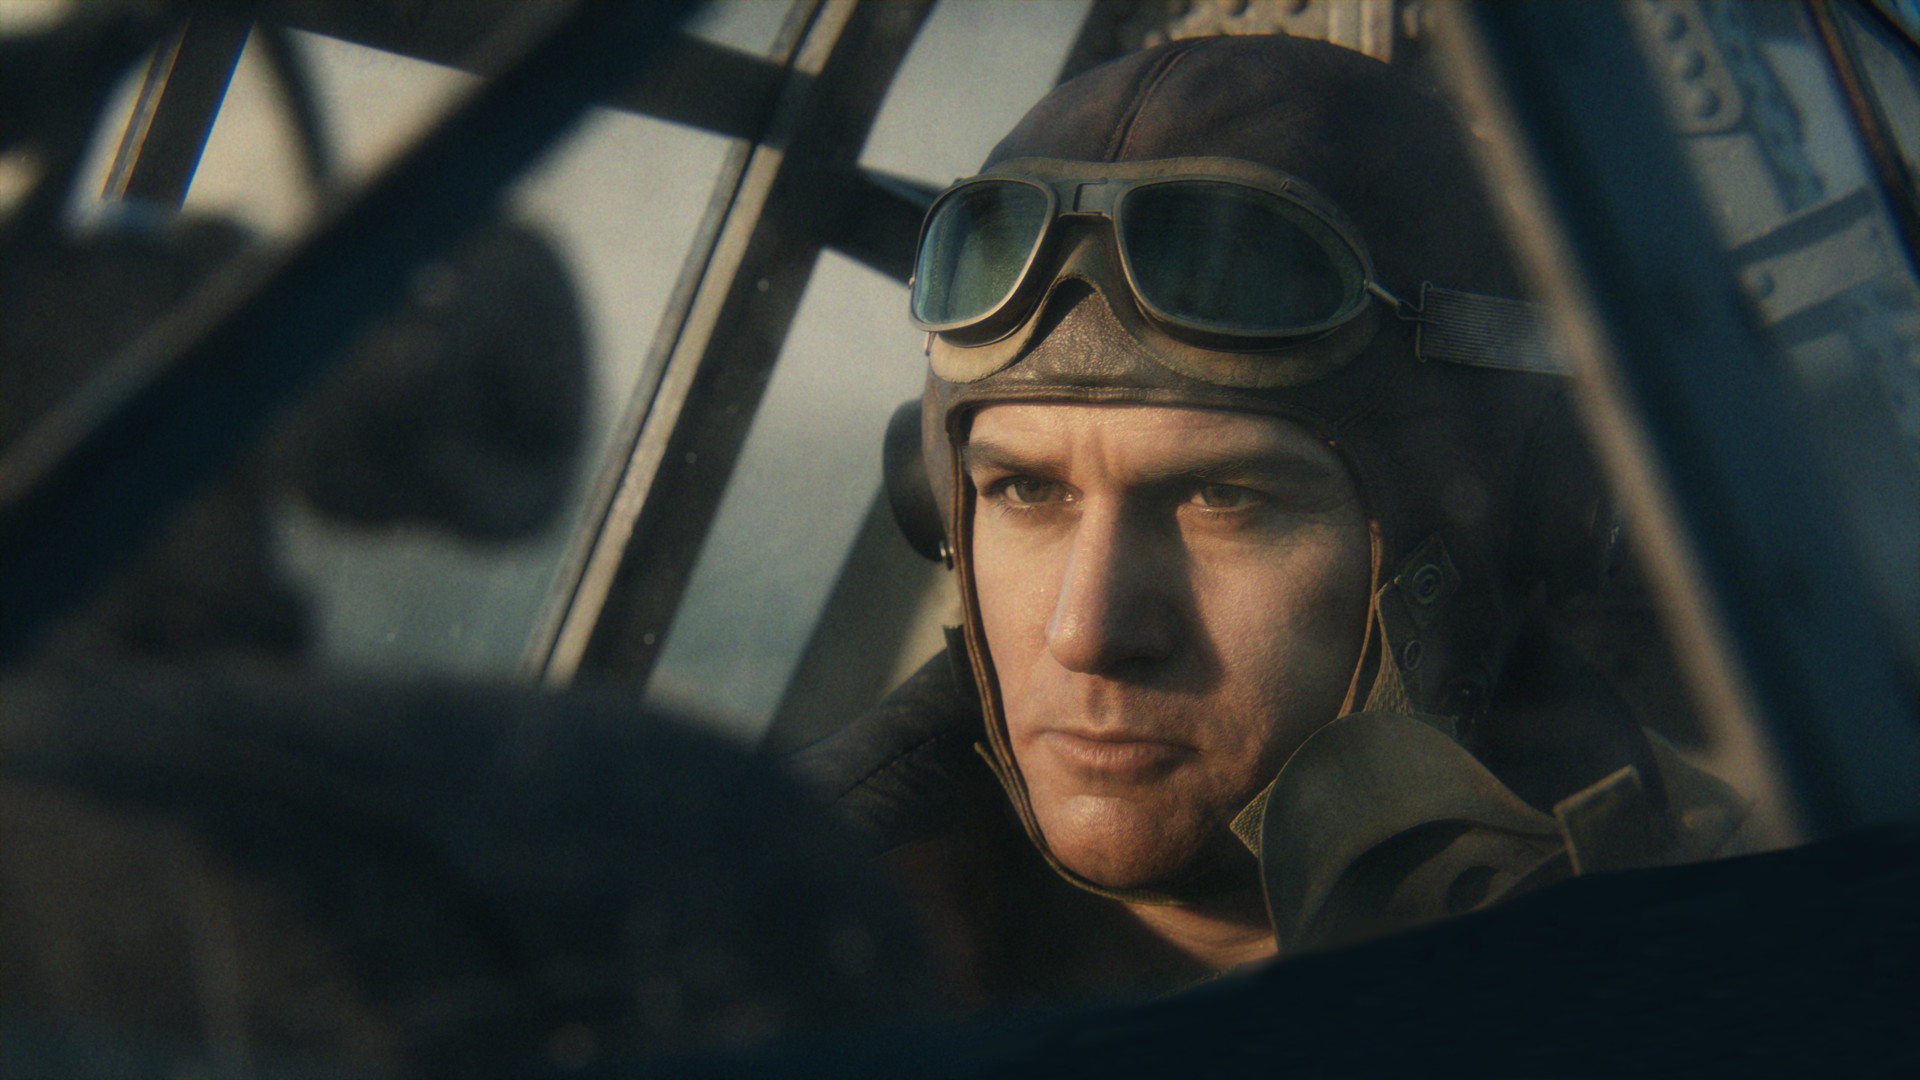 Call of Duty Vanguard release date: A close-up of a pilot in a plane's cockpit.